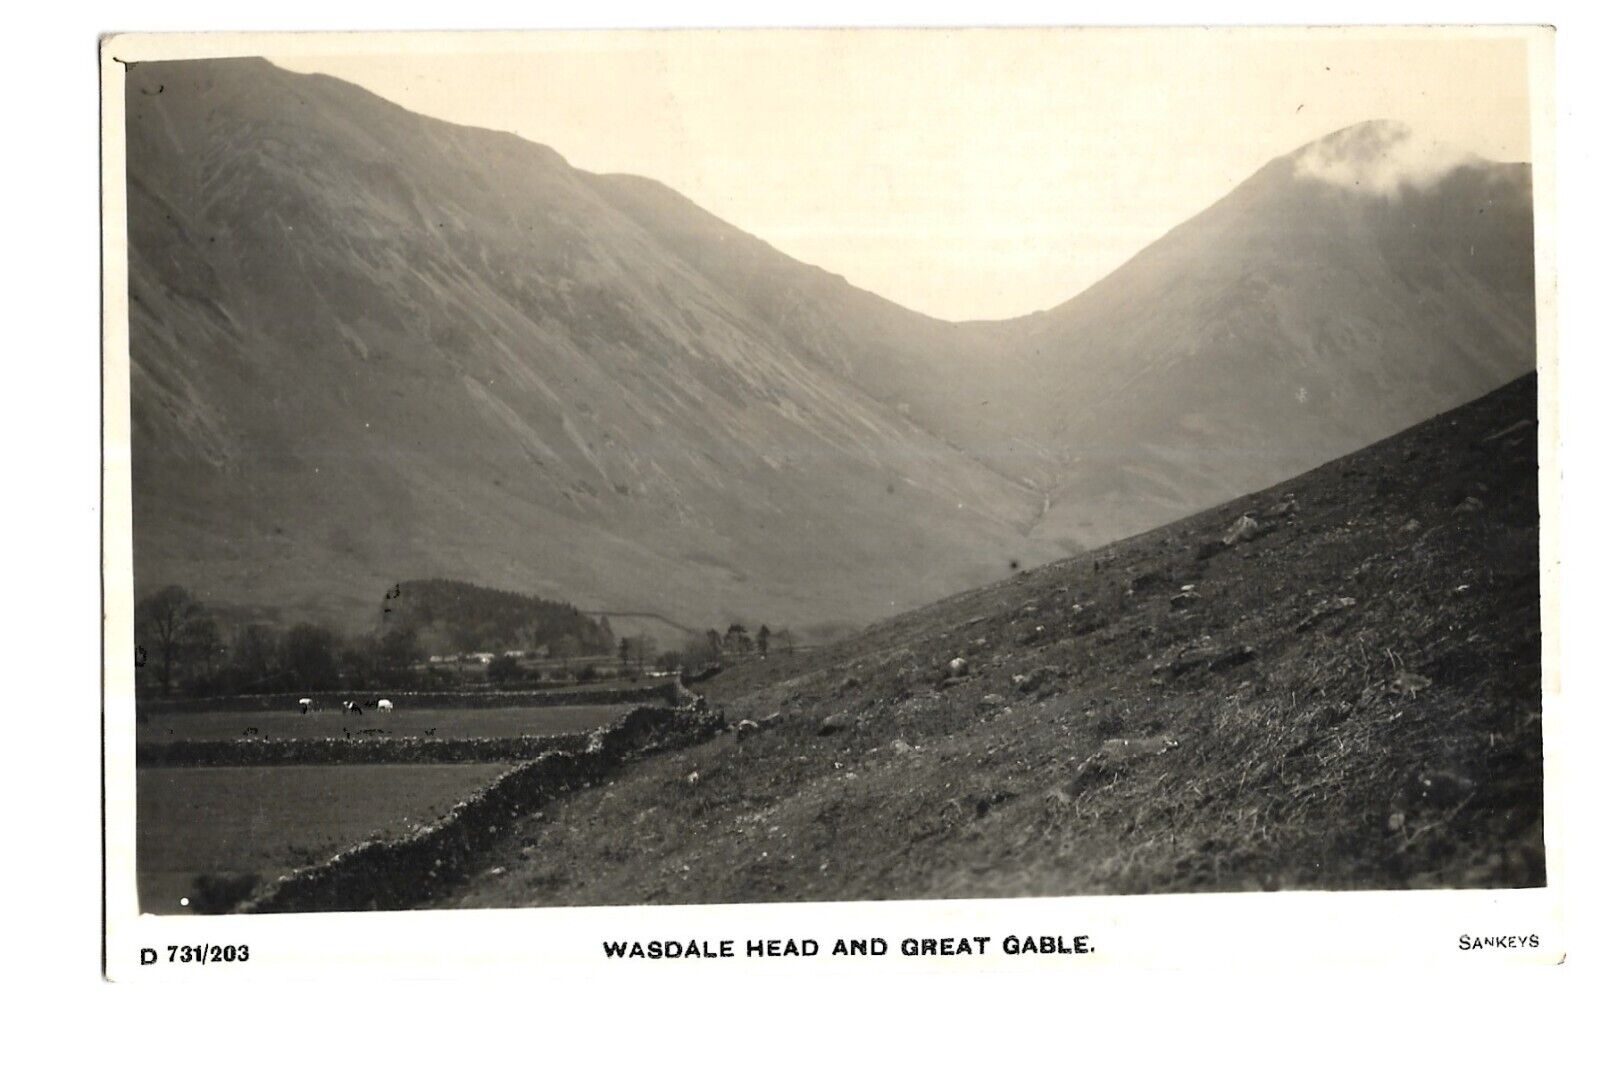 House Clearance - Cumbria. Wasdale Head and Great Gable. R/P by Sankey. Posted at Seascale.